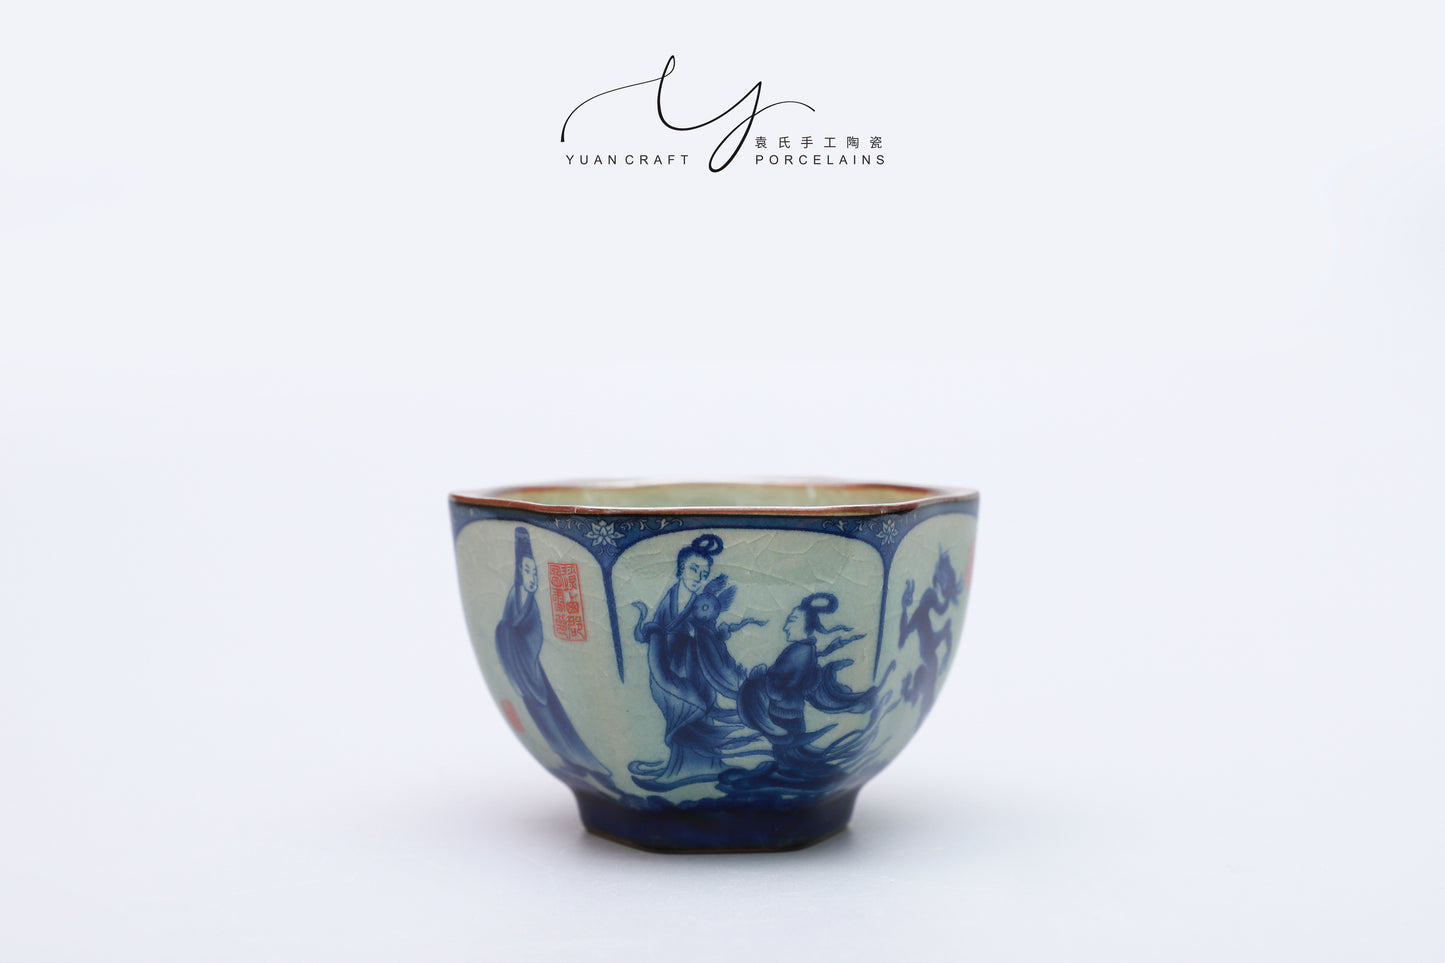 Chinese Tradition Hexagonal Tea Bowl - The Song of Luo Shen